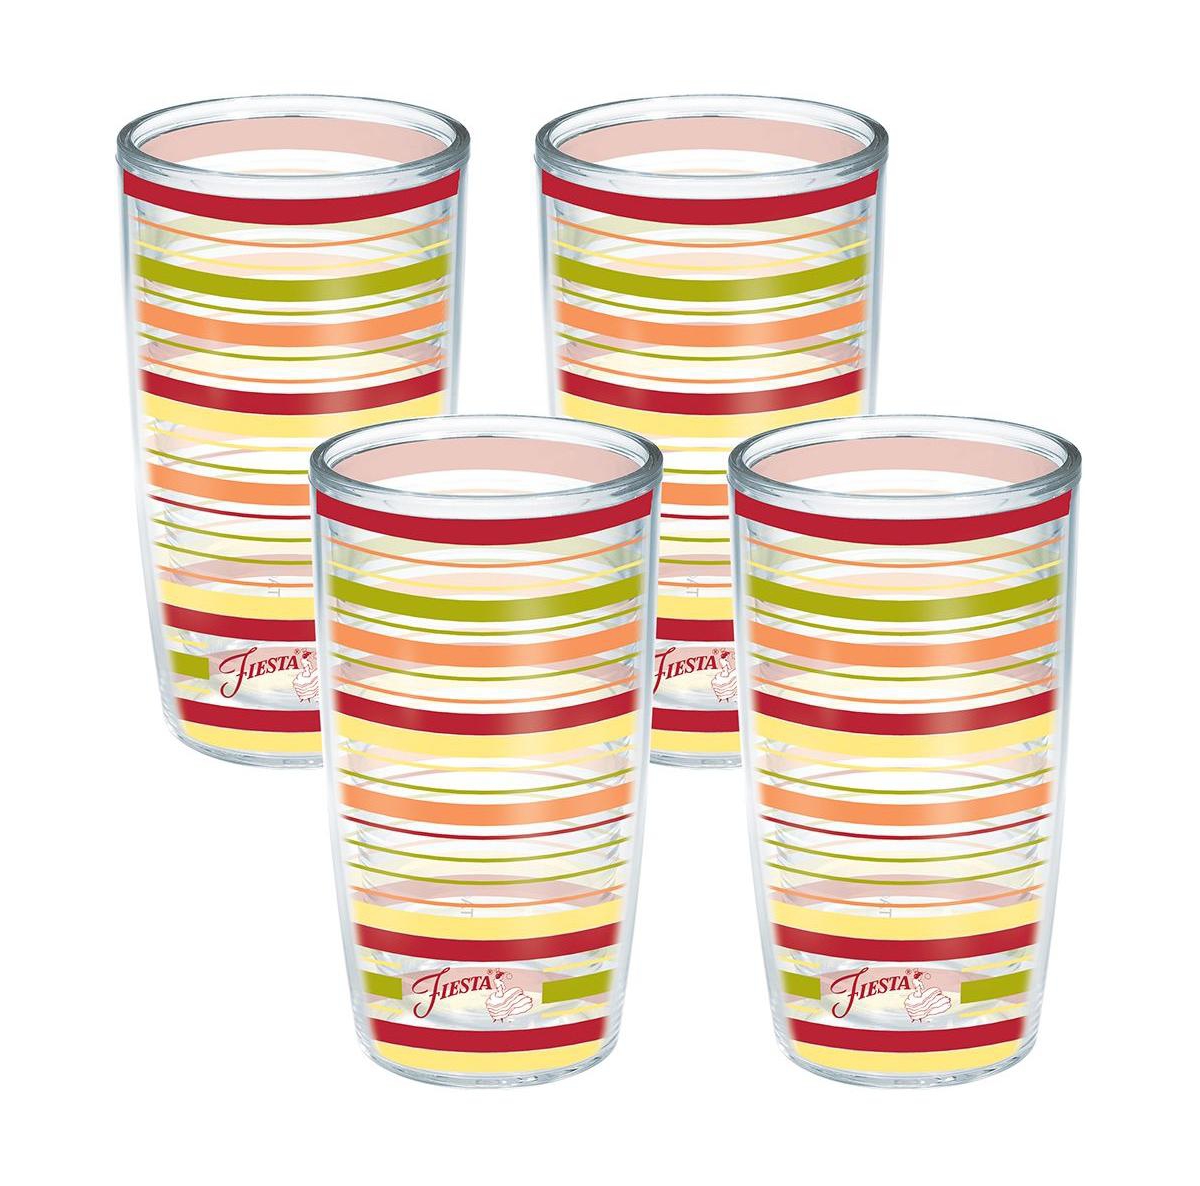 Tervis Tumbler Tervis Fiesta Sunny Stripes Made In Usa Double Walled Insulated Tumbler Cup Keeps Drinks Cold & Hot, In Open Miscellaneous